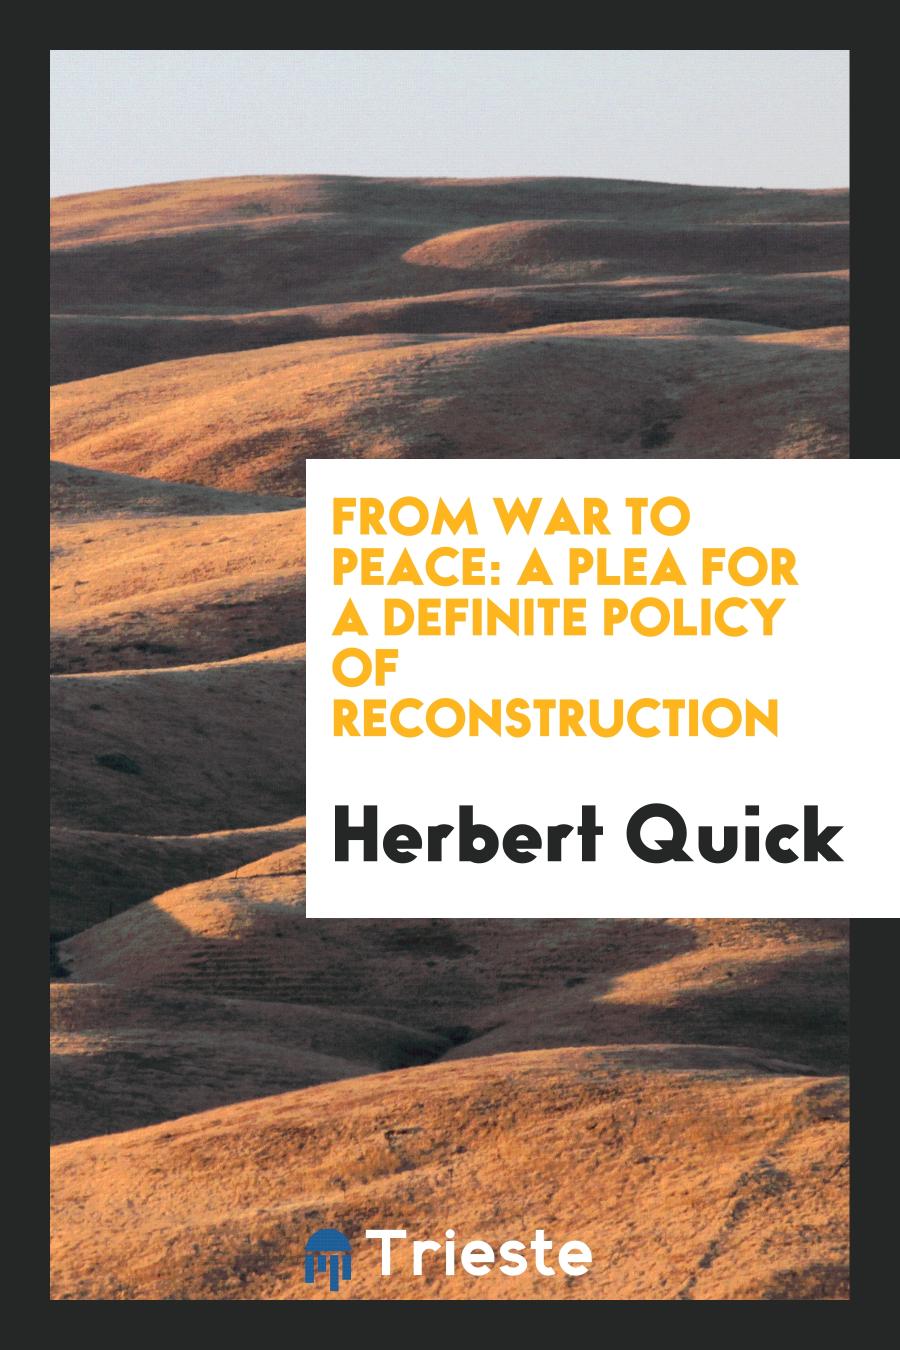 From War to Peace: A Plea for a Definite Policy of Reconstruction